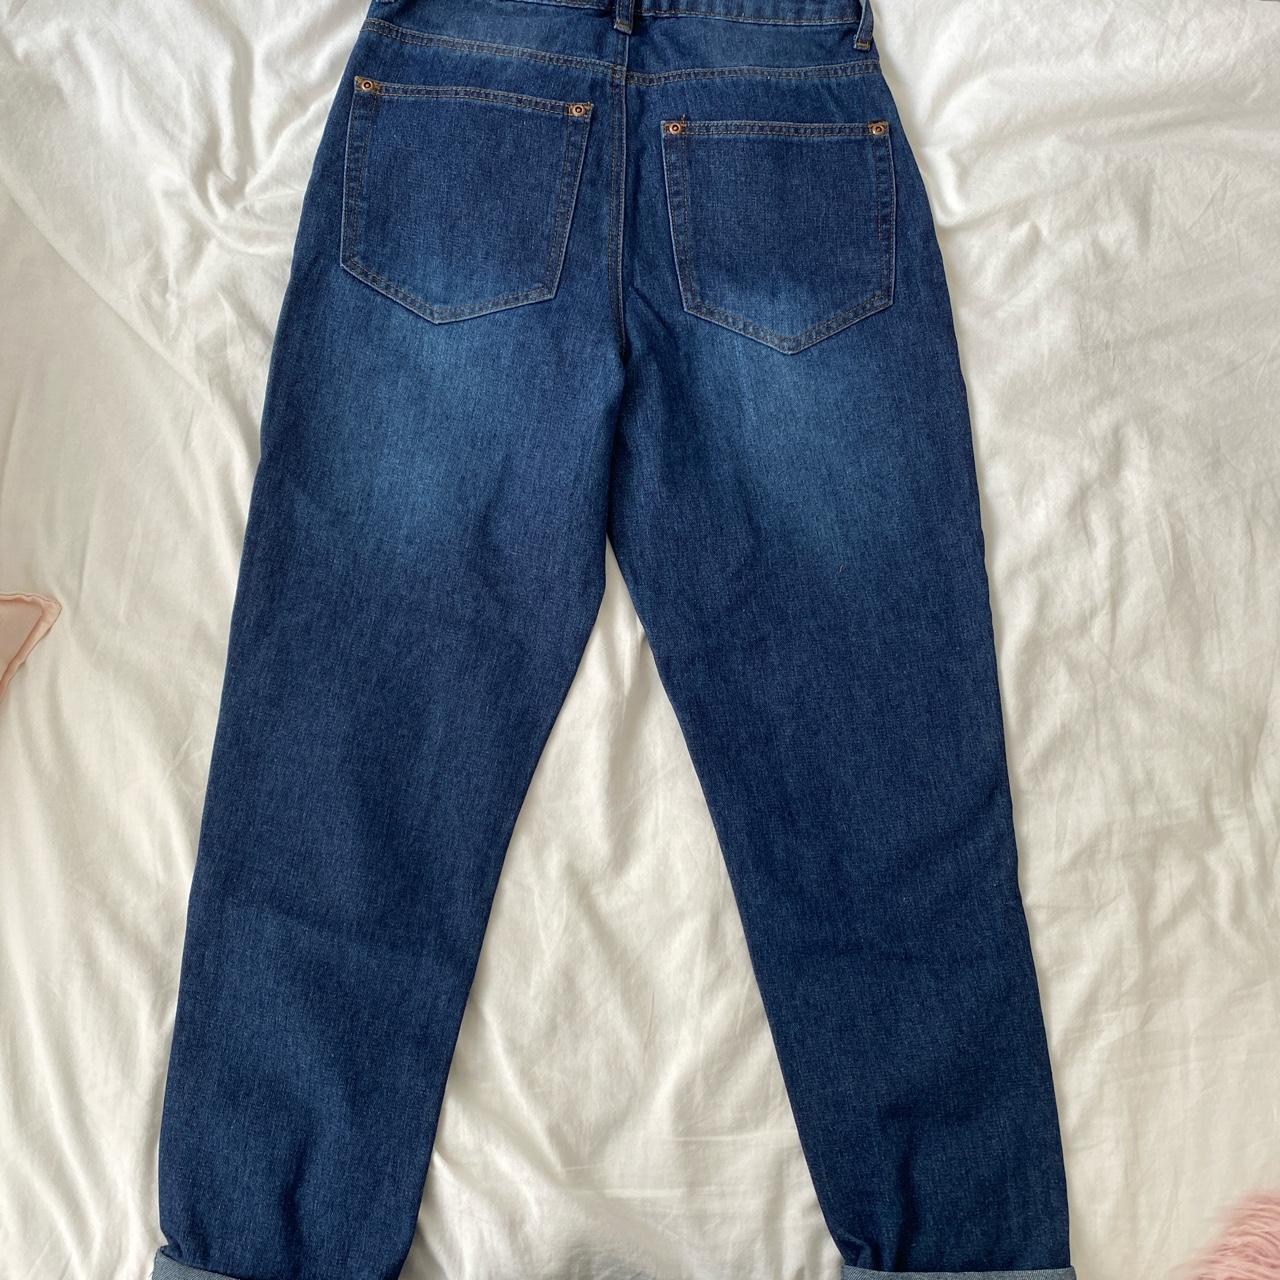 I Saw It First Women's Blue and Navy Jeans (2)